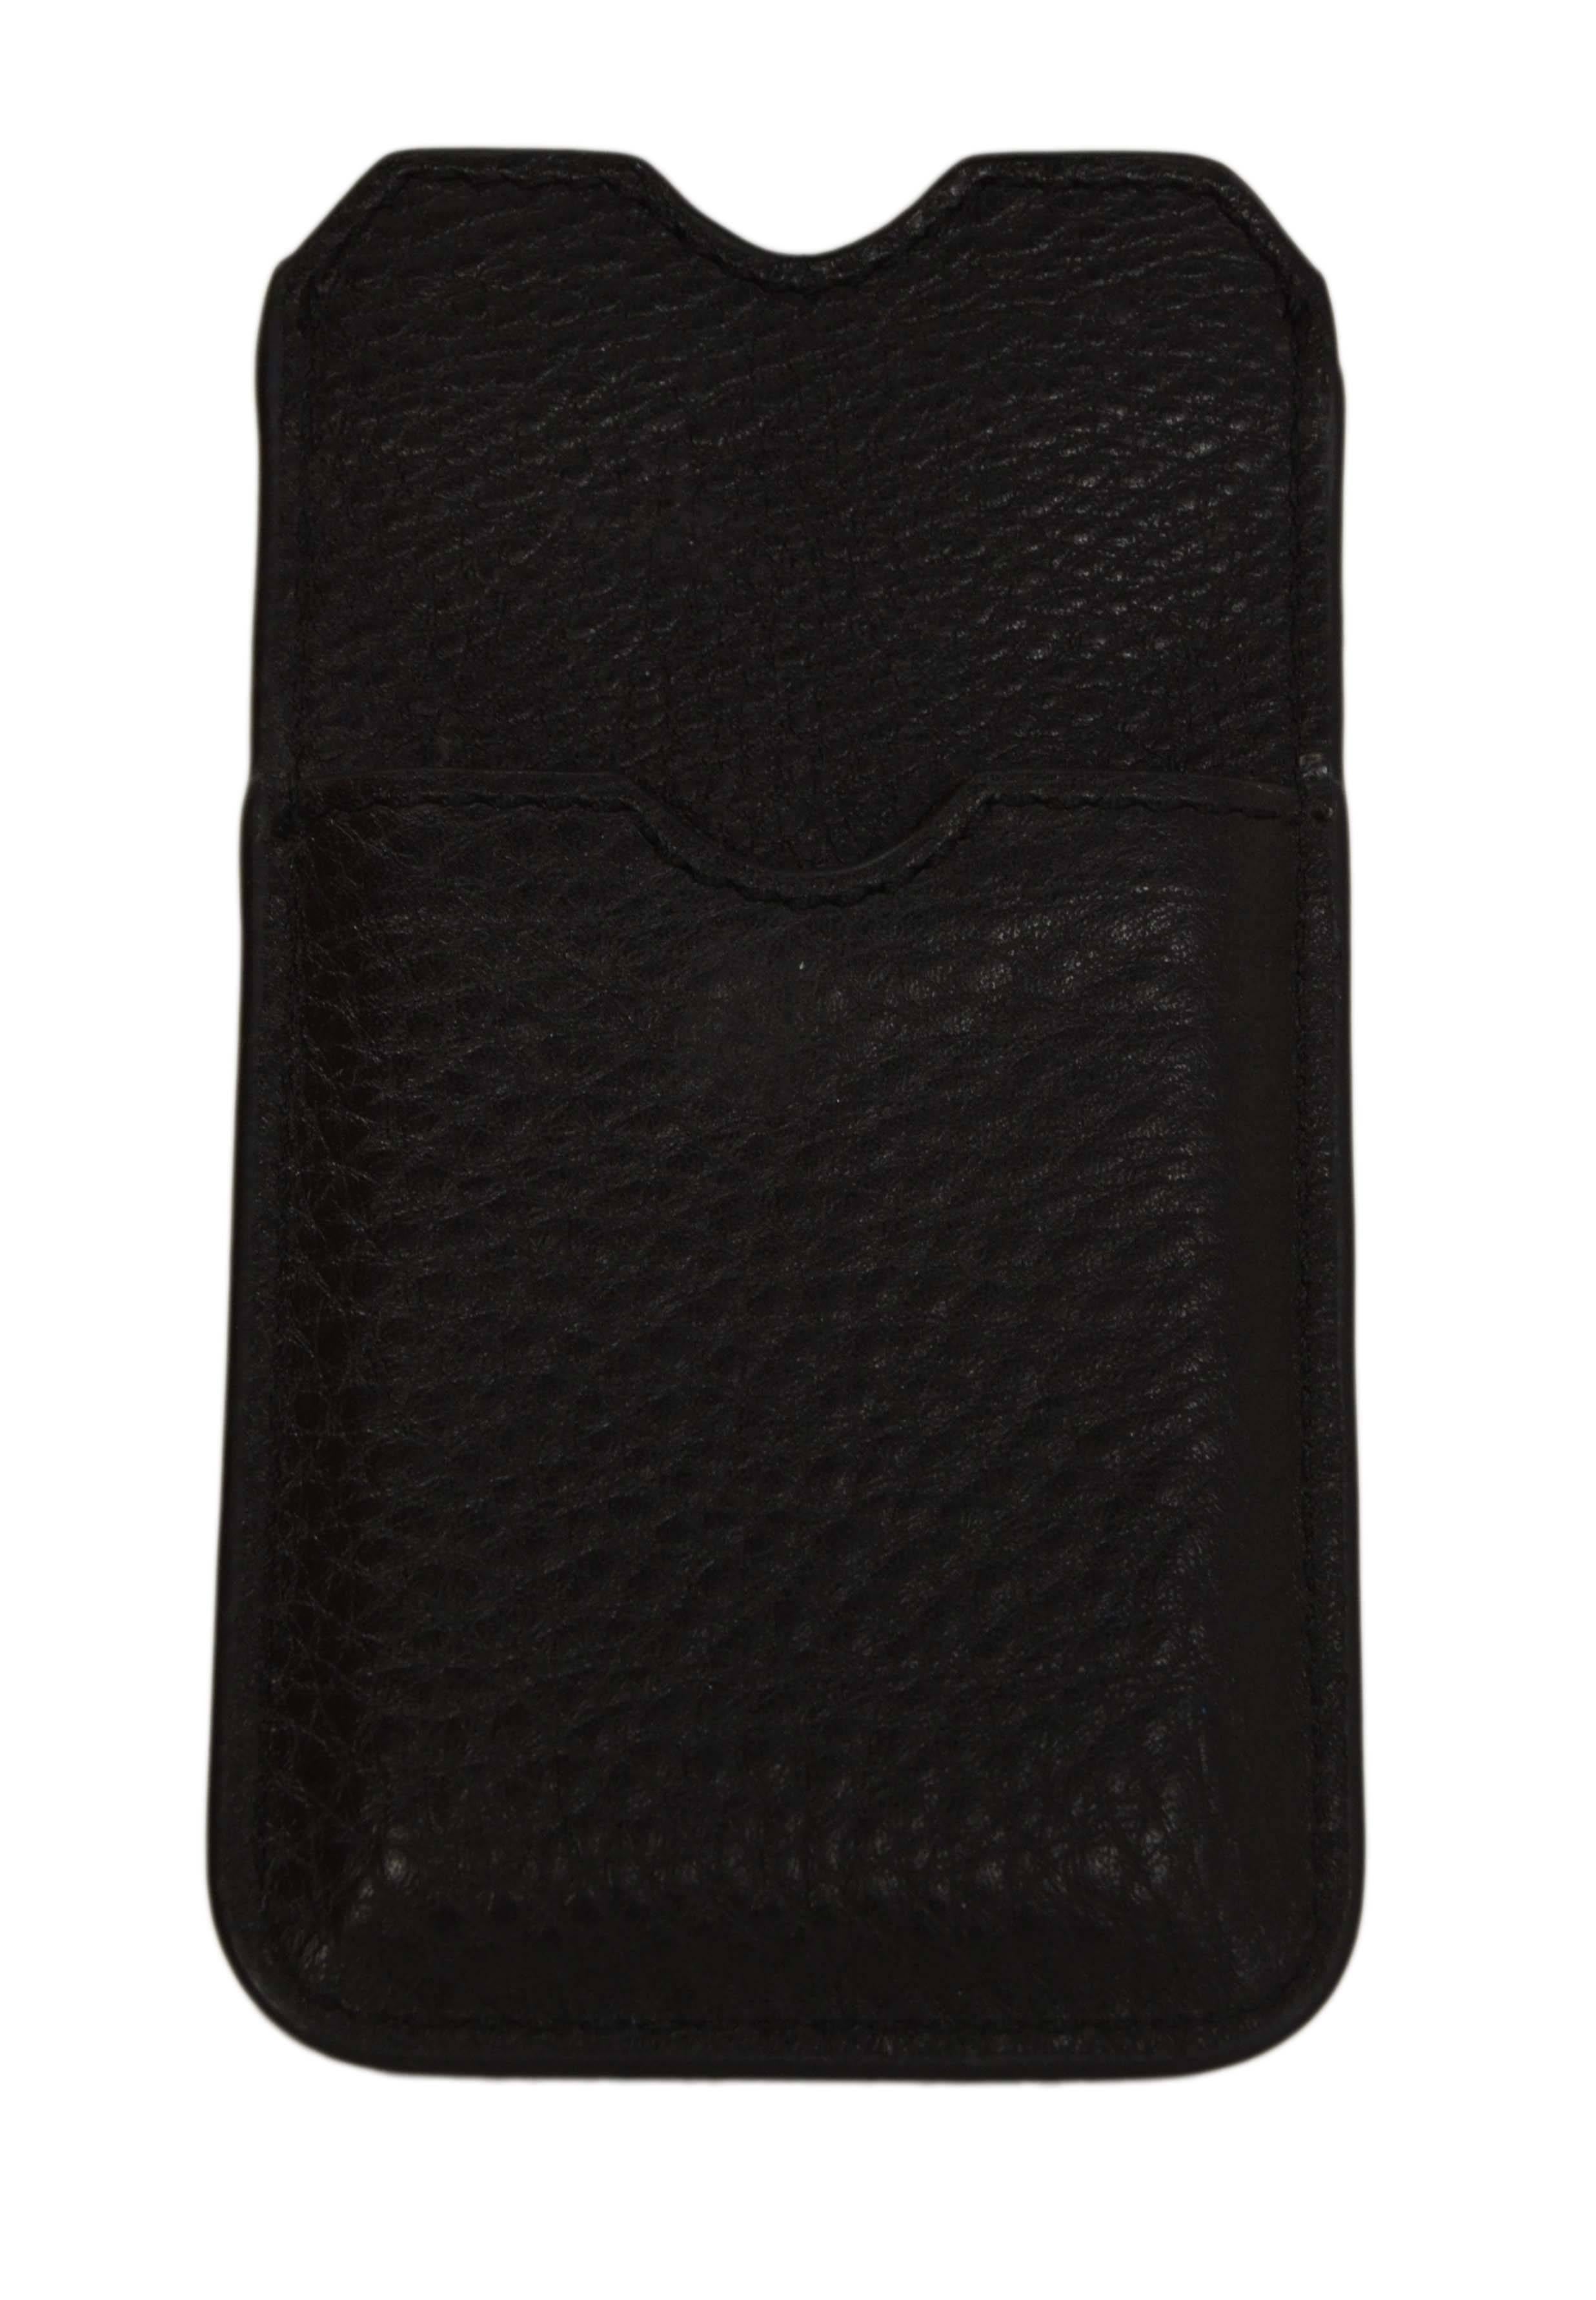 Burberry Black Leather Studded Cellphone Case 
Features gunmetal/black circular studs on one side of case
Made In: China
Color: Black
Hardware: Gunmetal/black
Materials: Leather and metal
Lining: Black canvas
Closure/Opening: Two